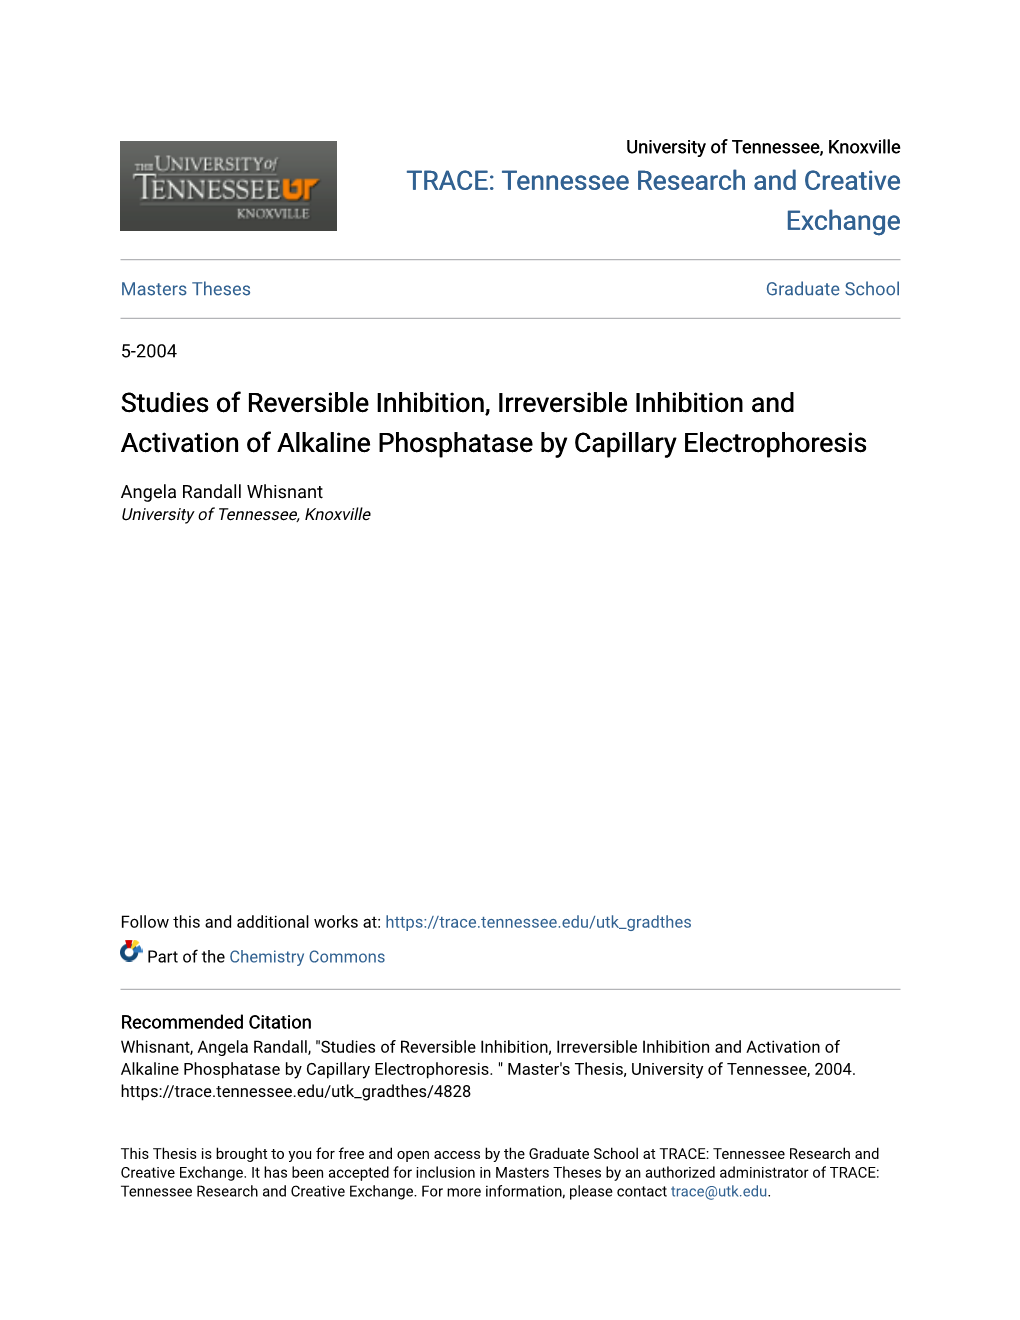 Studies of Reversible Inhibition, Irreversible Inhibition and Activation of Alkaline Phosphatase by Capillary Electrophoresis